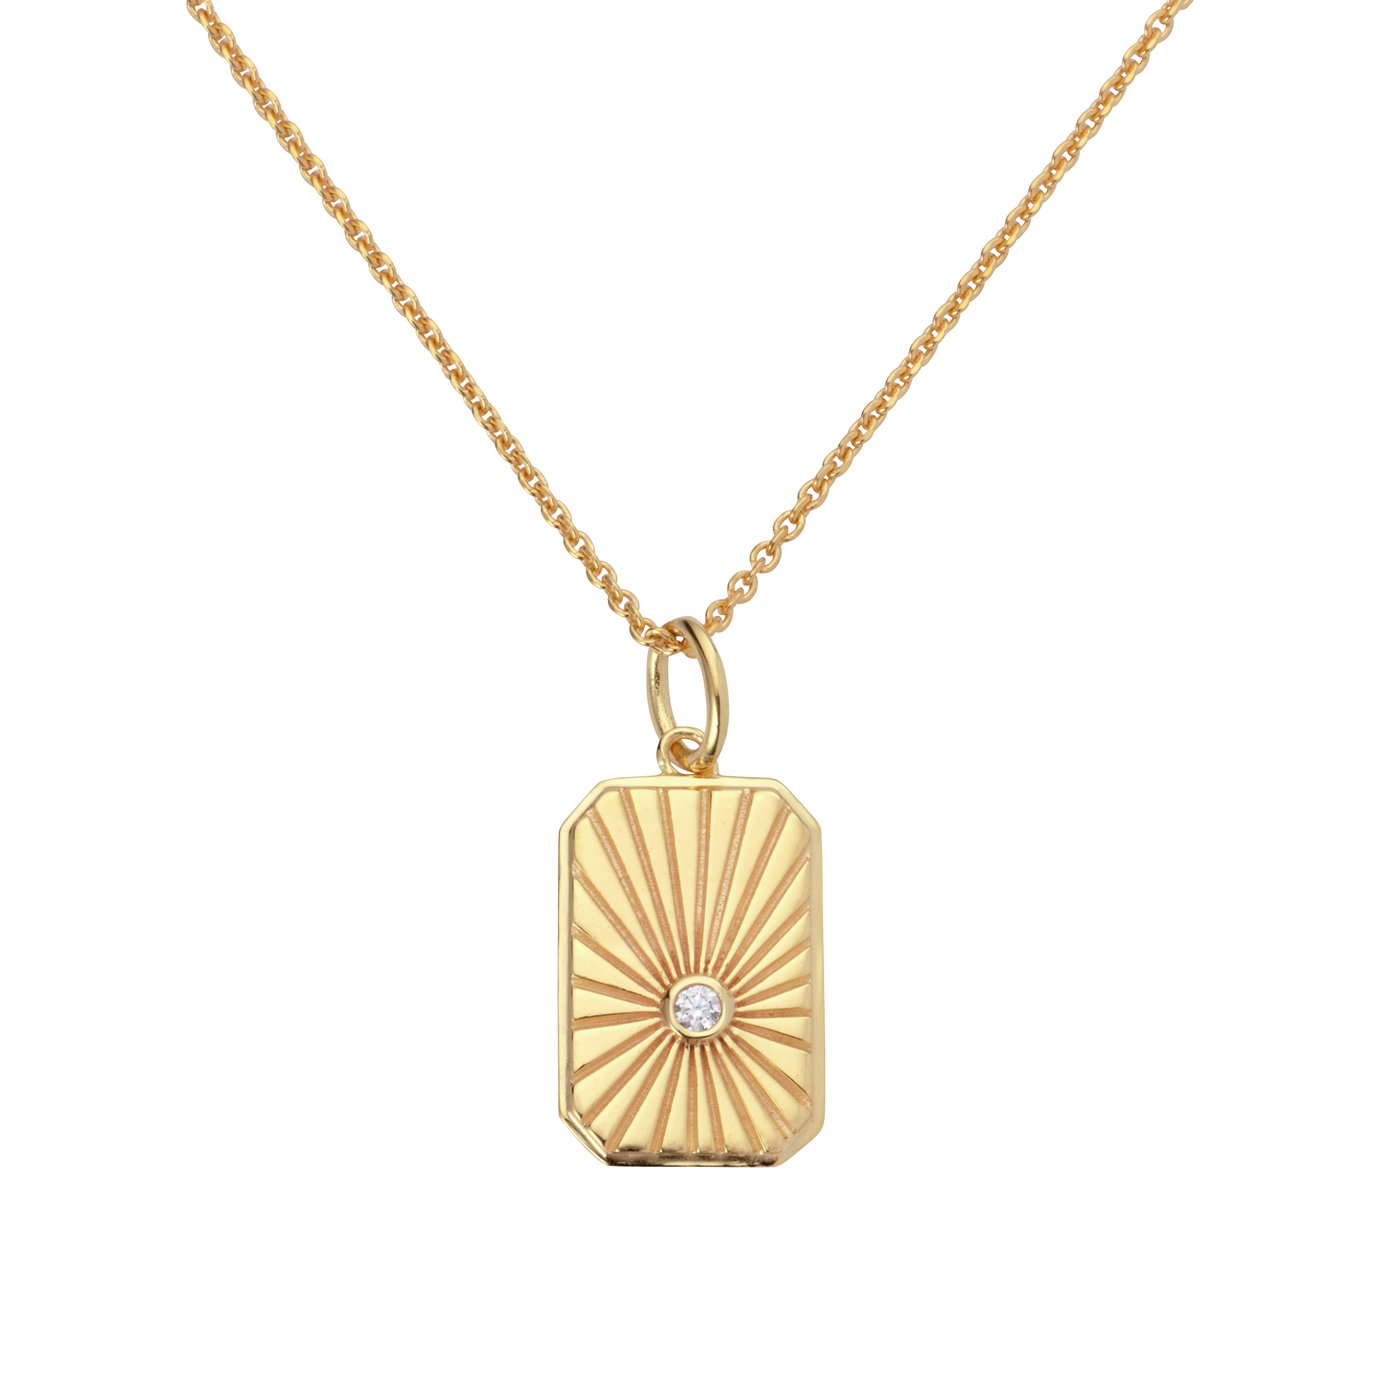 Revere 14ct Gold Plated Sterling Silver Sun Charm Pendant